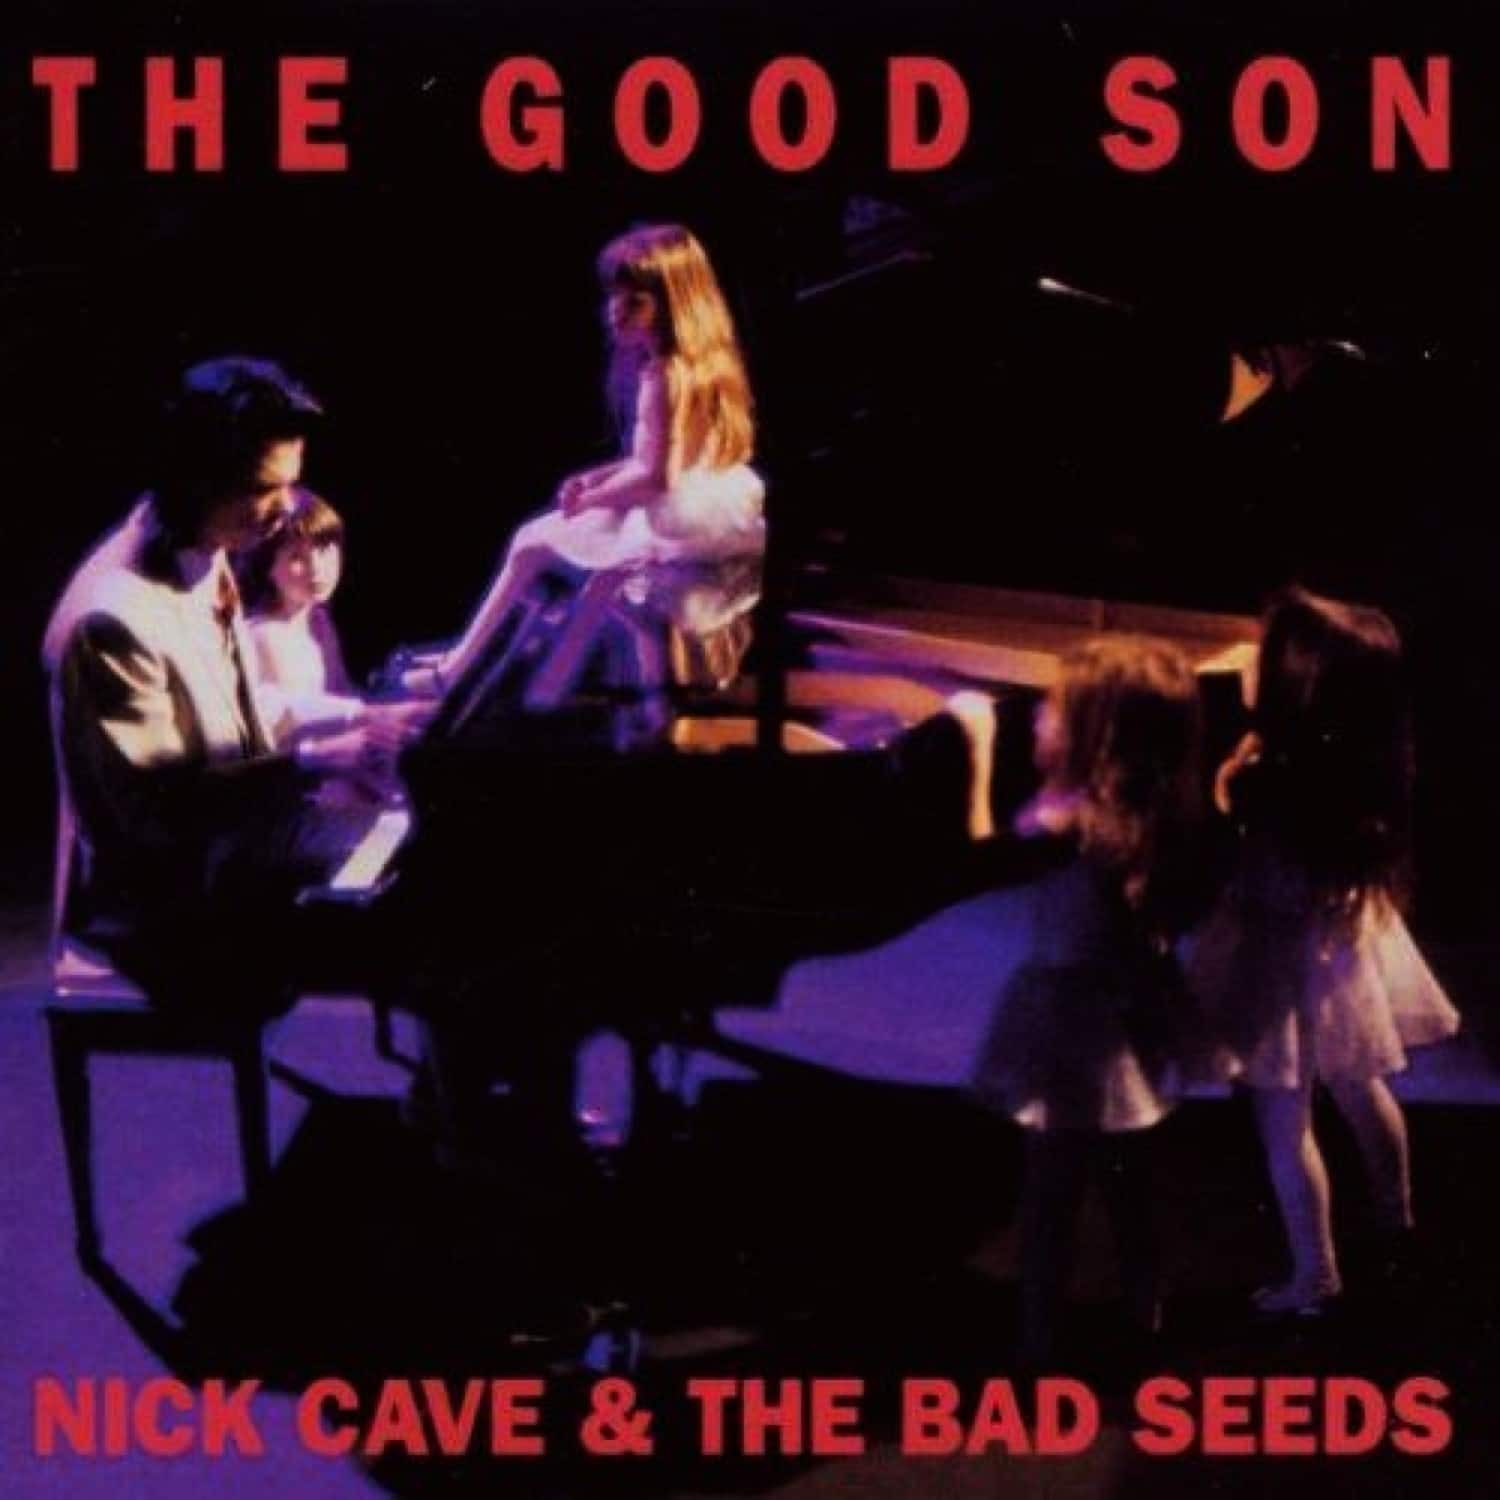 Nick Cave & The Bad Seeds - THE GOOD SON. 